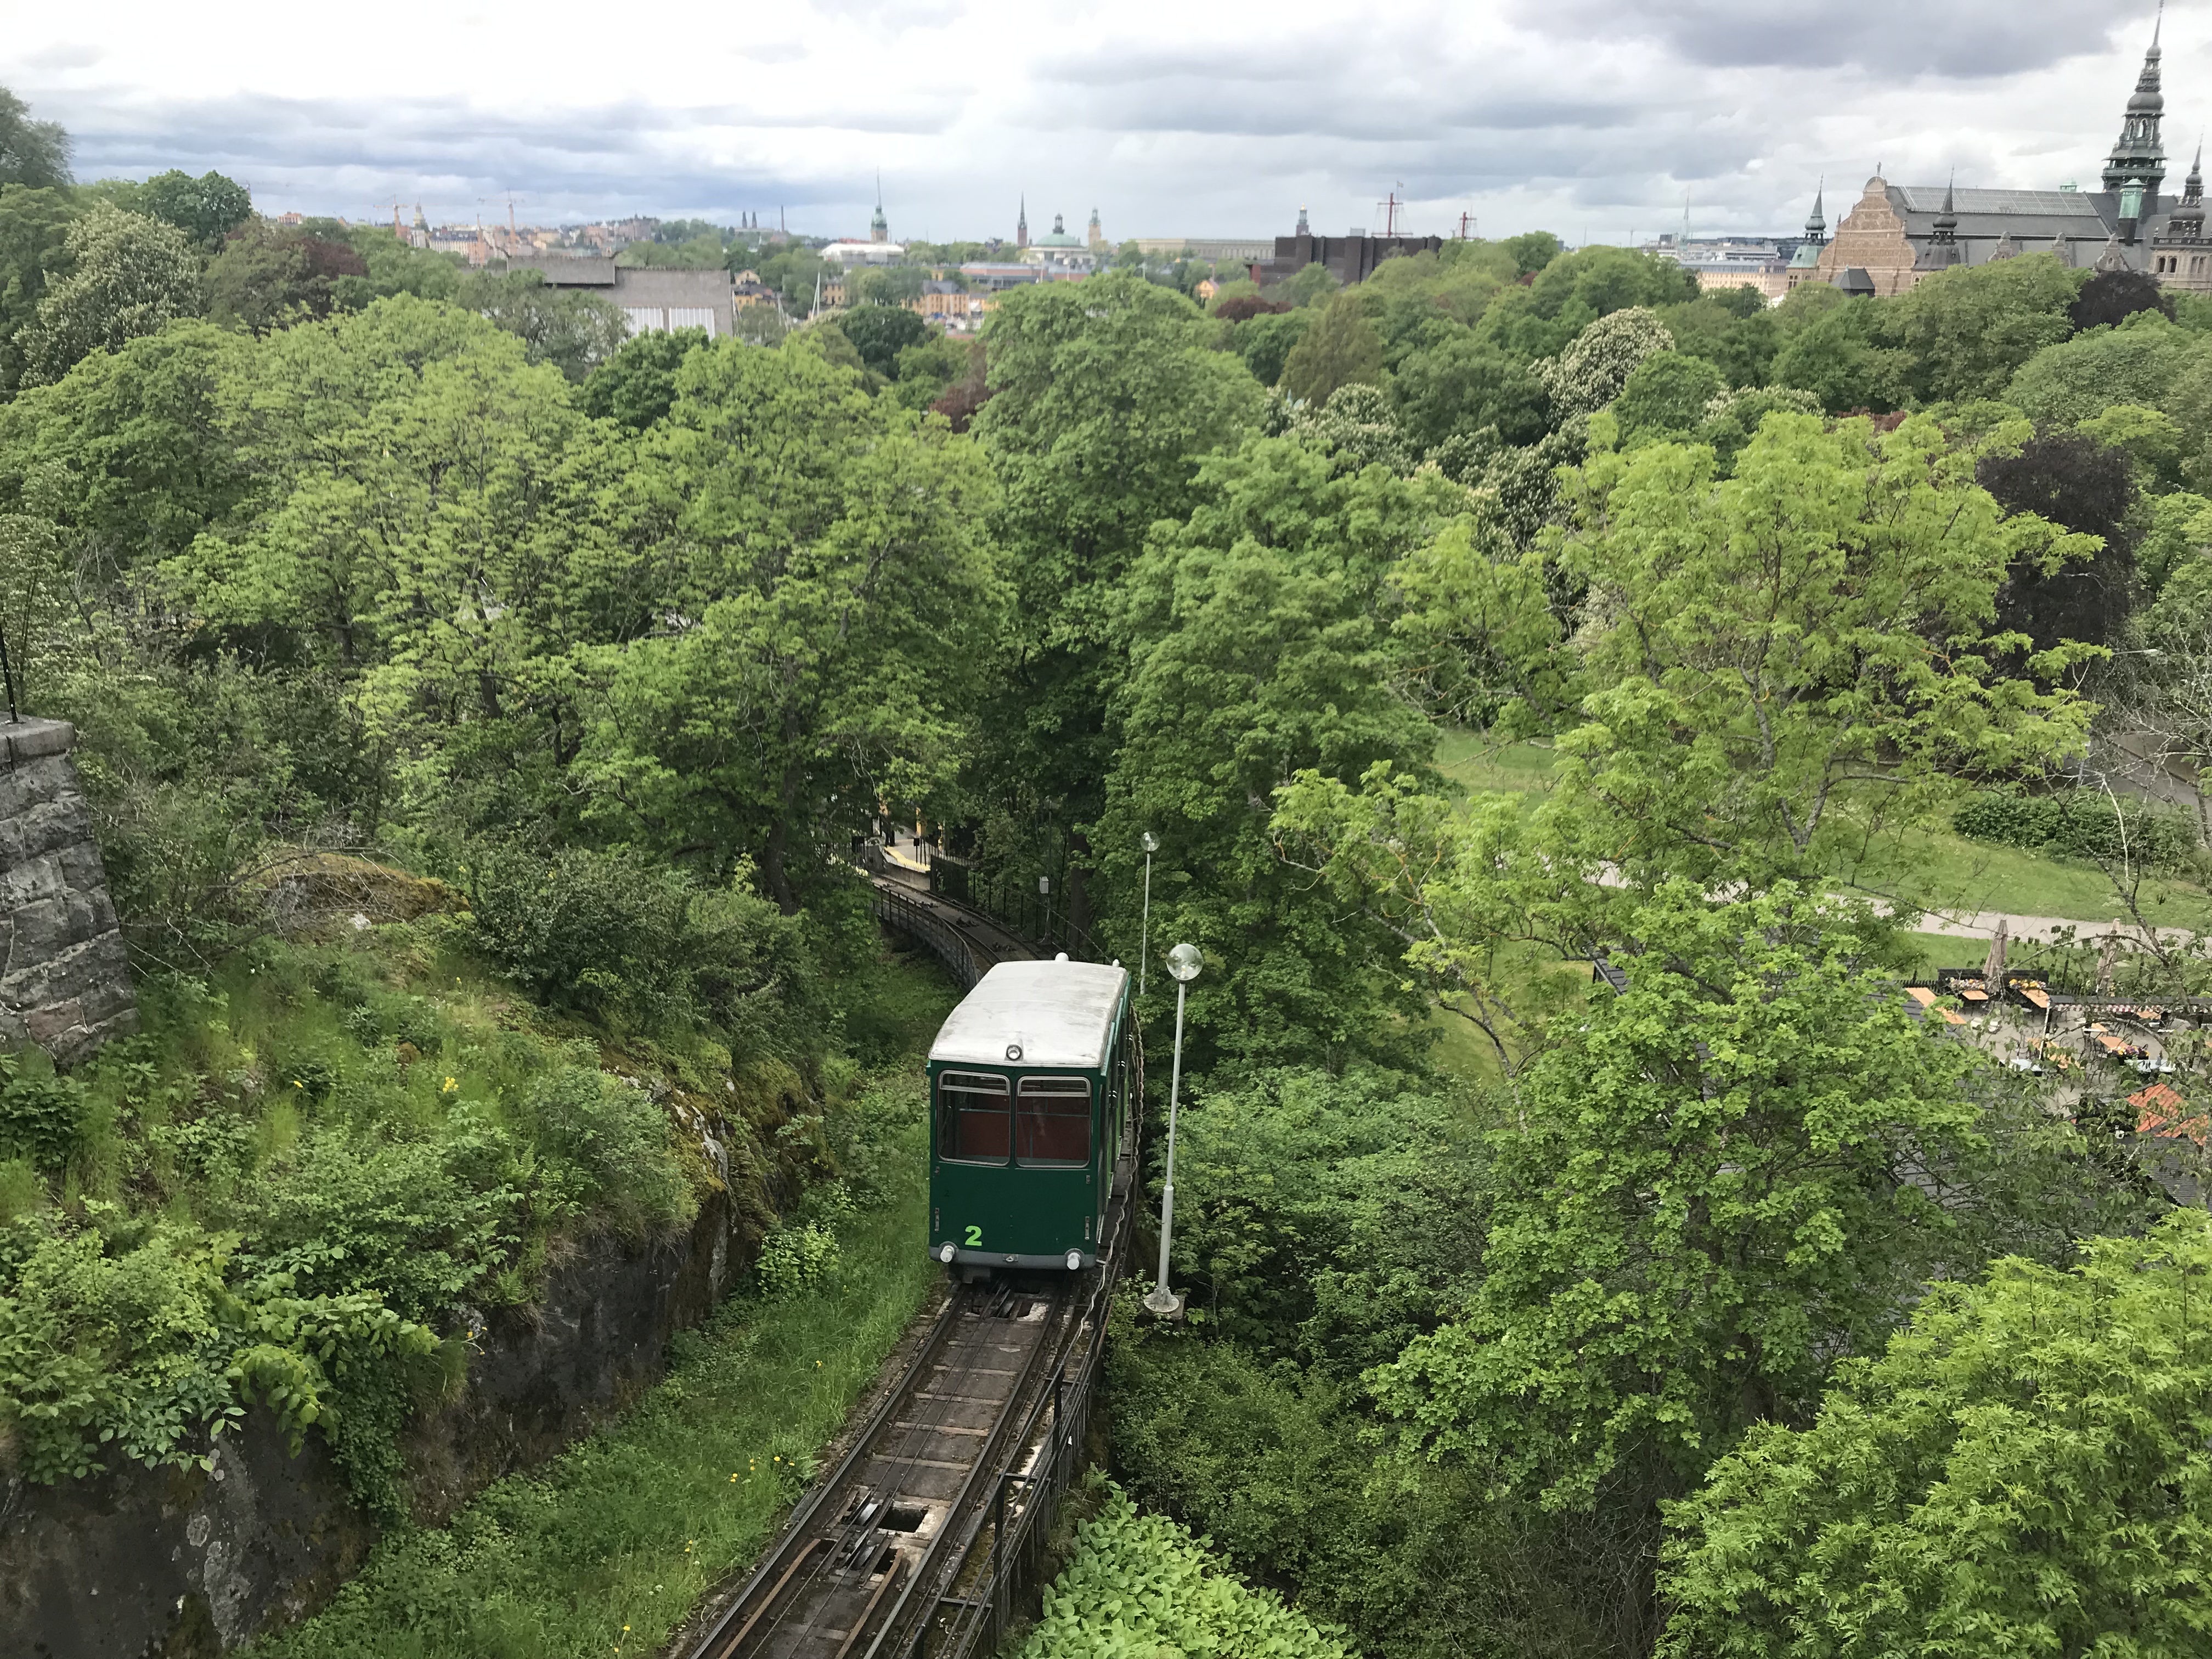 The Funicular rail at Skansen, Stockholm, is a great way of going up and down this open air museum which showcases the Swedish way of life 